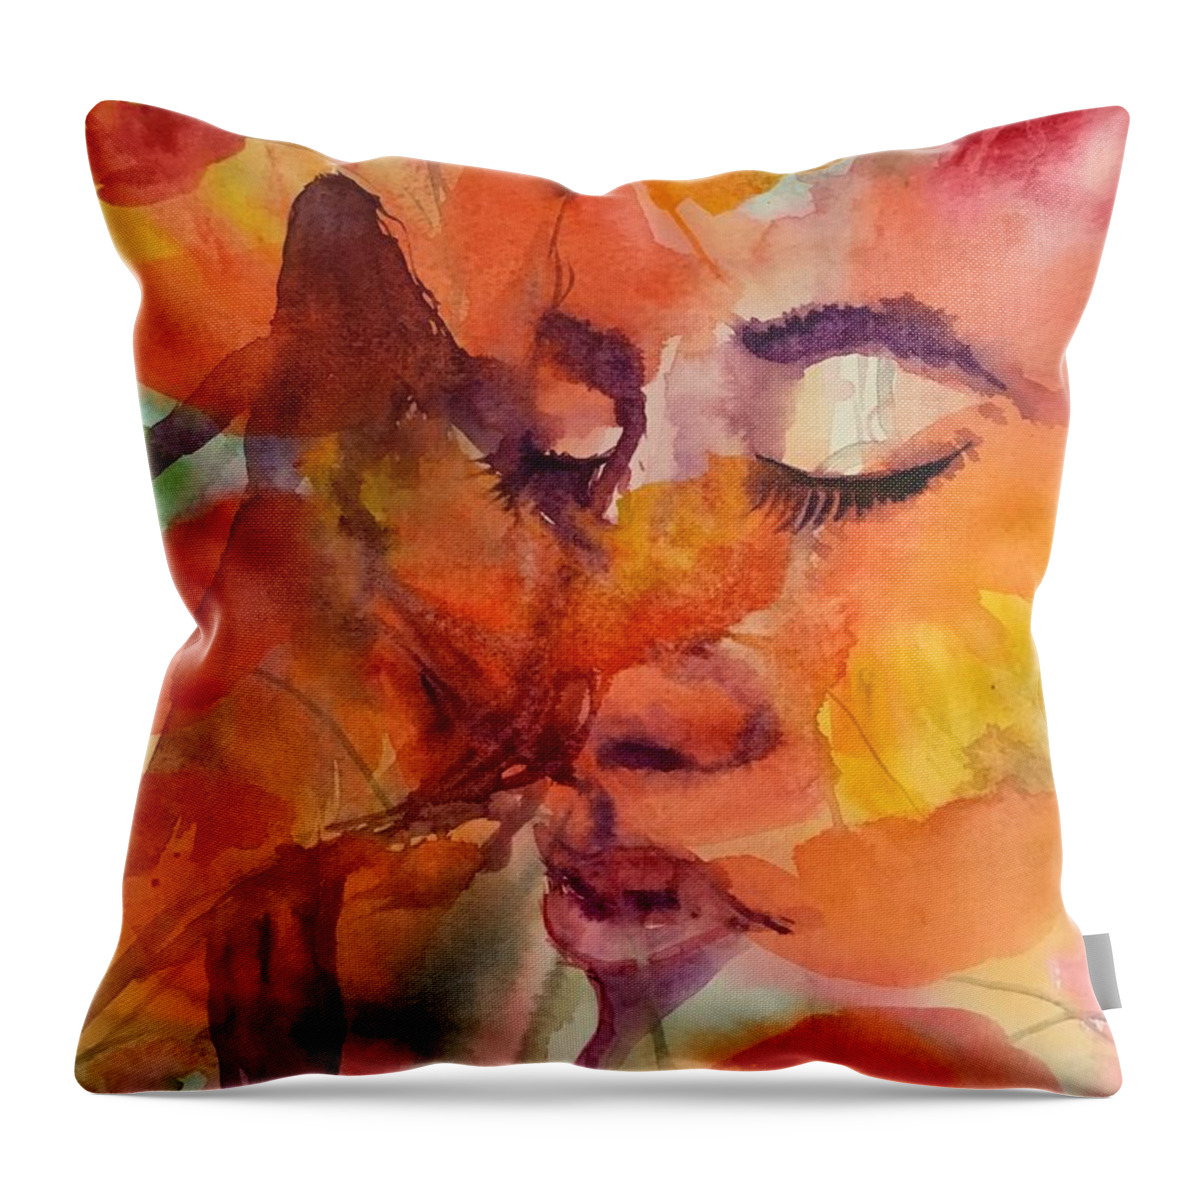 1262019 Throw Pillow featuring the painting 1262019 by Han in Huang wong